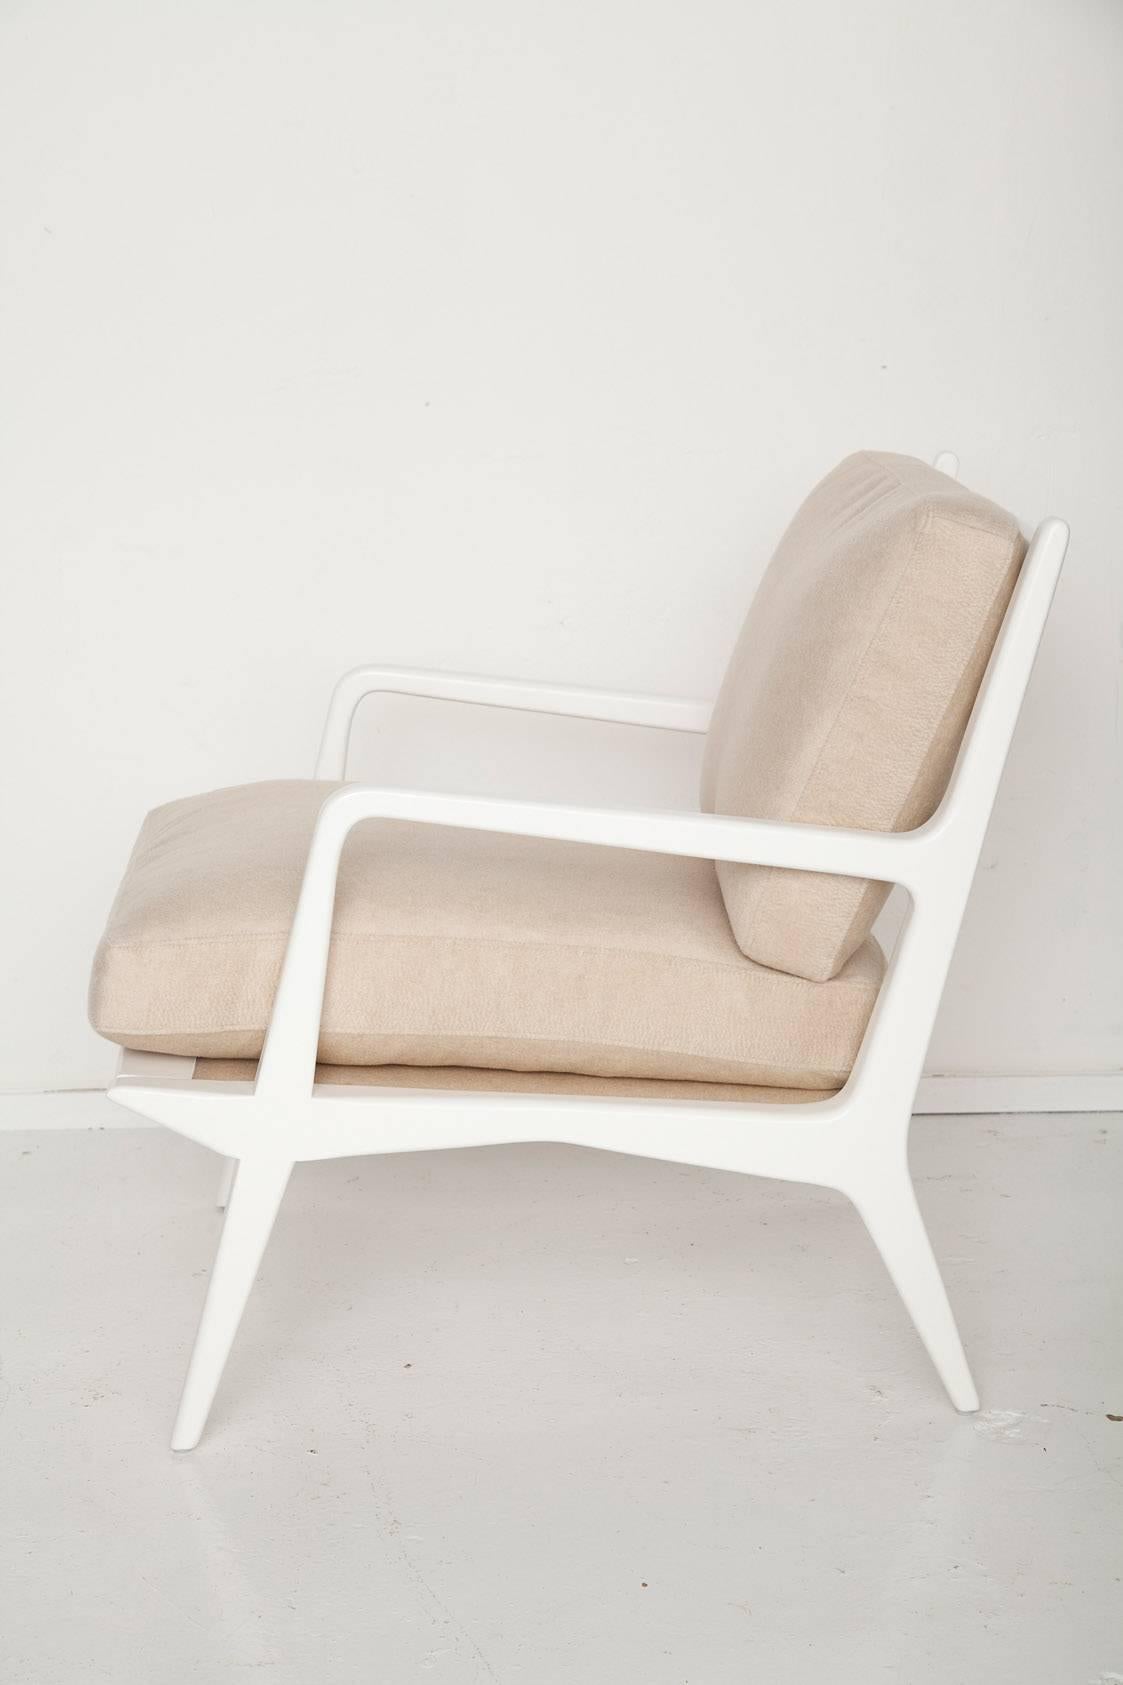 Designed by Carlo Di Carli for M. Singer & Sons, circa 1955, we've given this chair a fresh, luxe update, accenting the wonderful lines of its frame in cream lacquer, and upholstering custom down-wrapped seat and back cushions in soft, palest